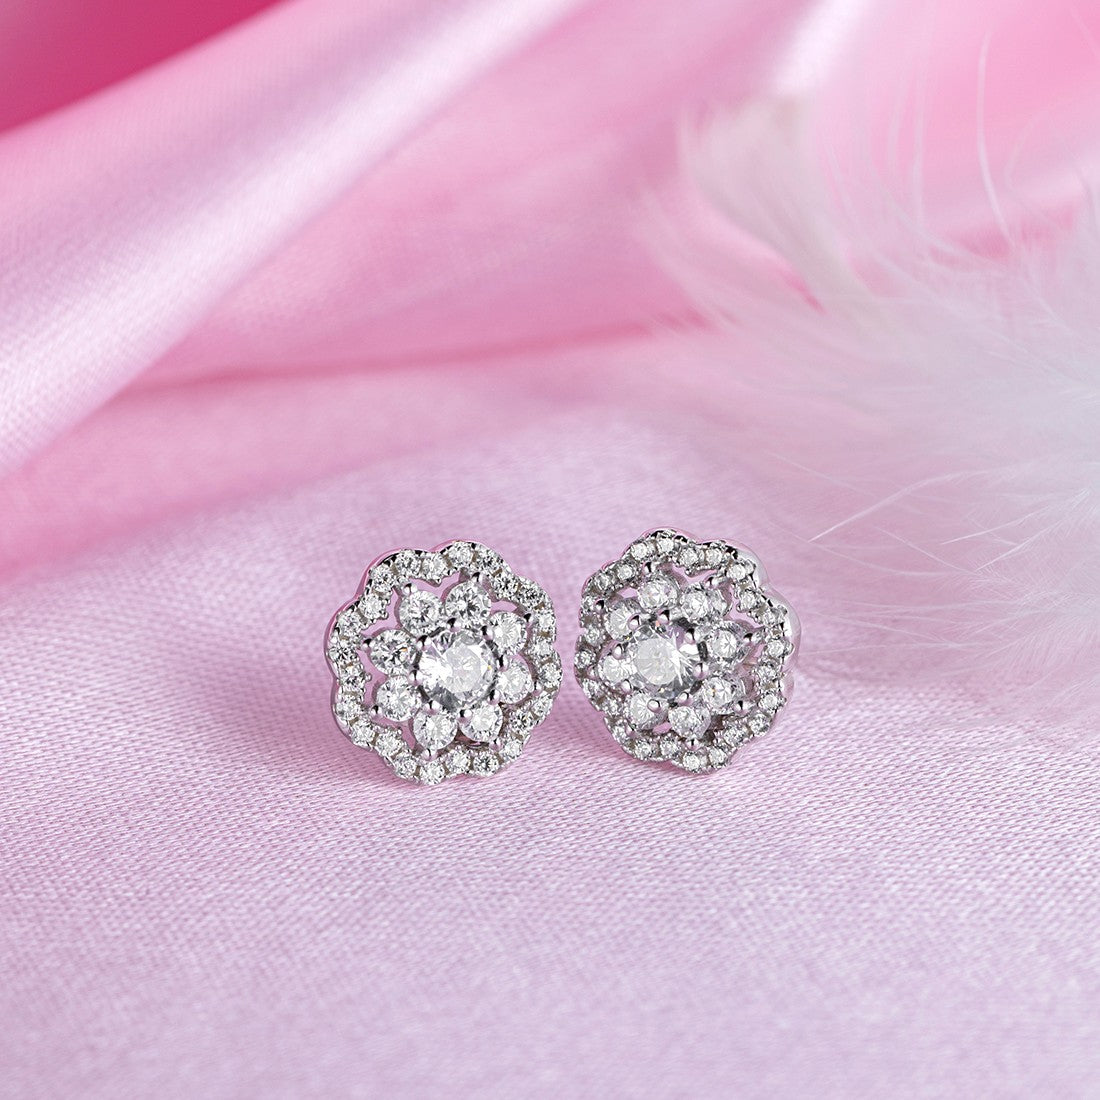 CZ Studded Floral 925 Sterling Silver Stud Earrings